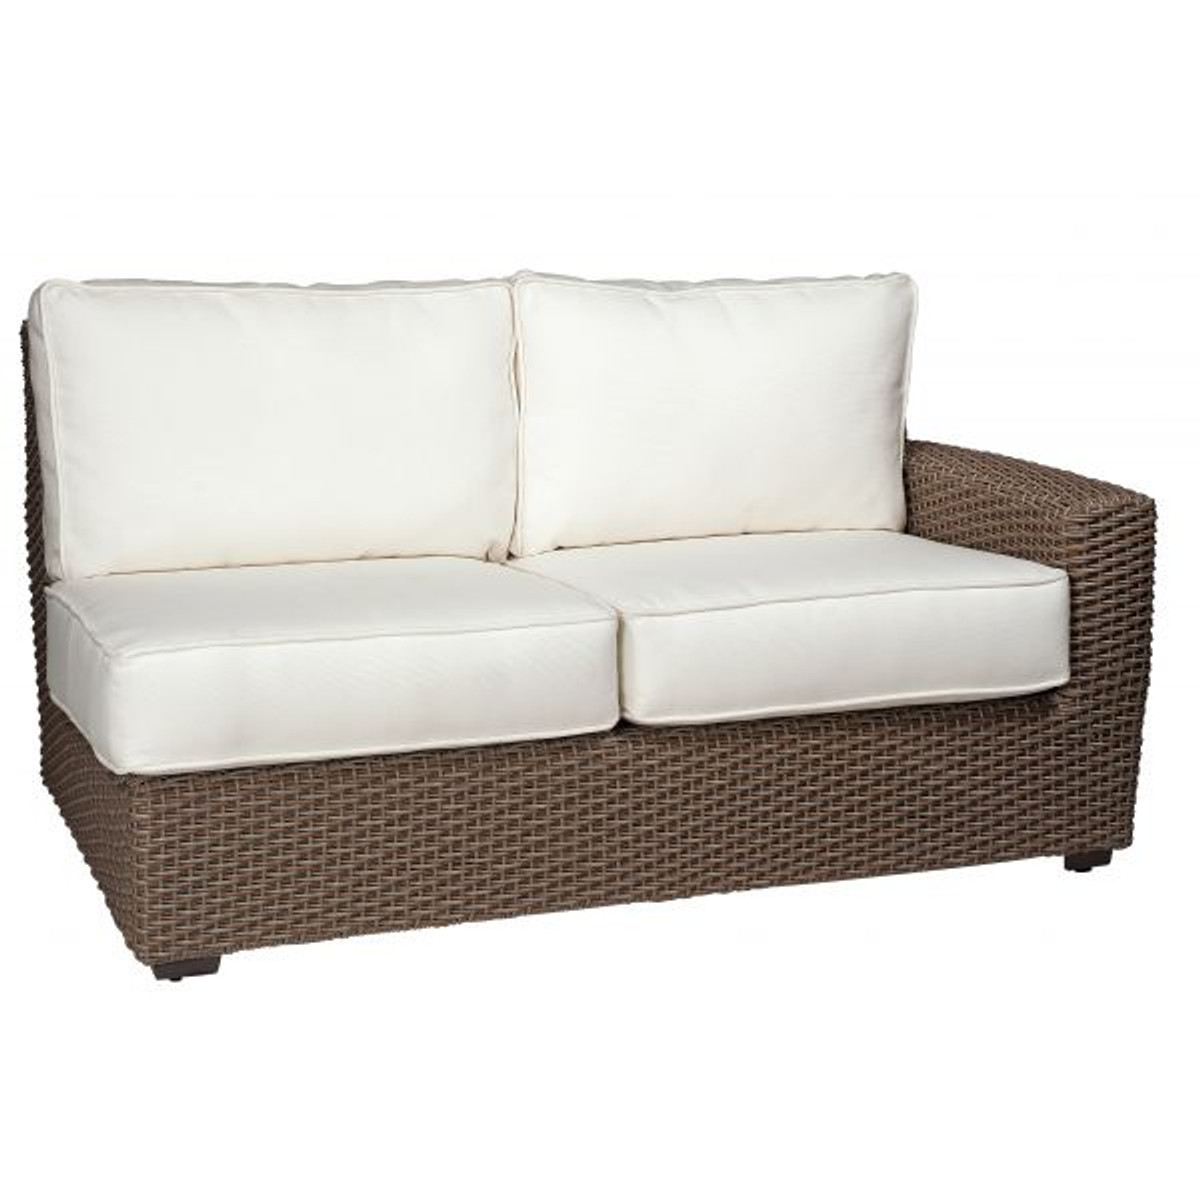 AUGUSTA RIGHT ARM FACING LOVE SEAT SECTIONAL